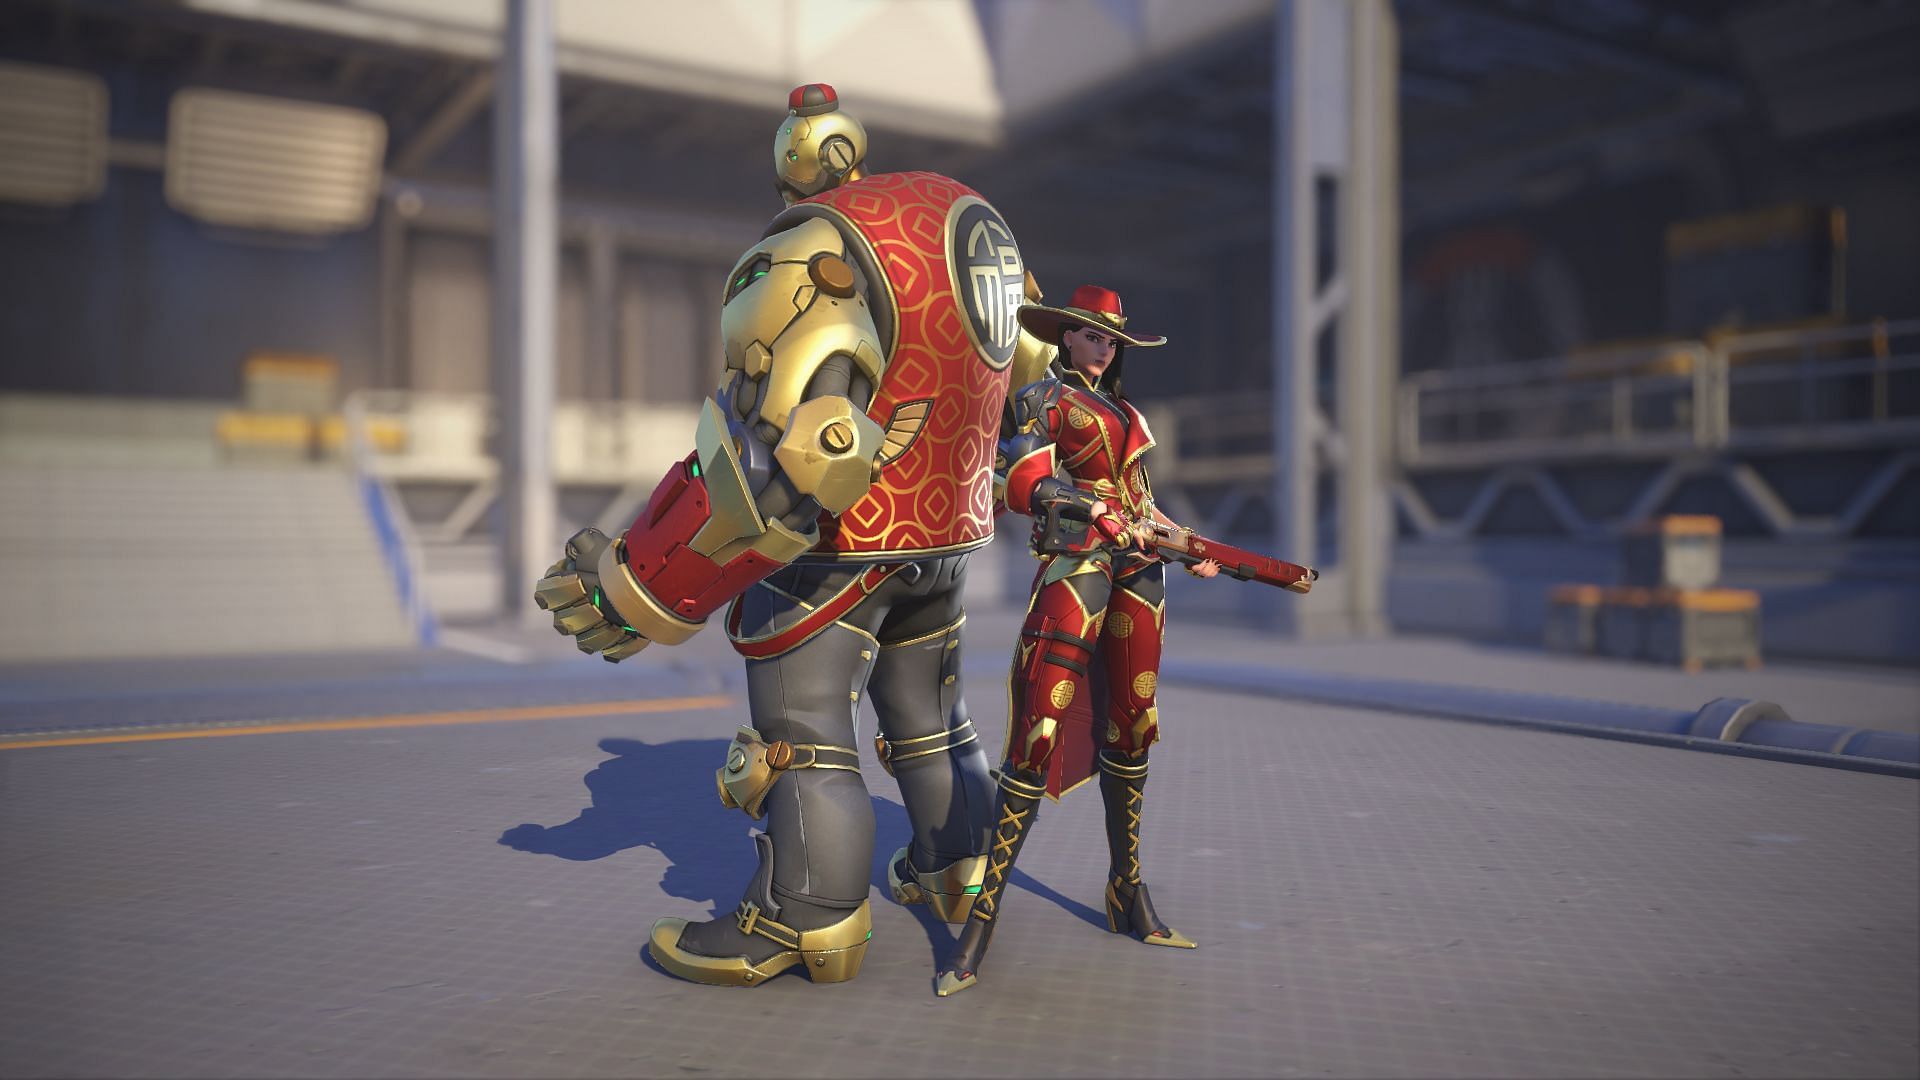 Prosperity skin for Ashe as seen in the game (Image via Blizzard Entertainment)